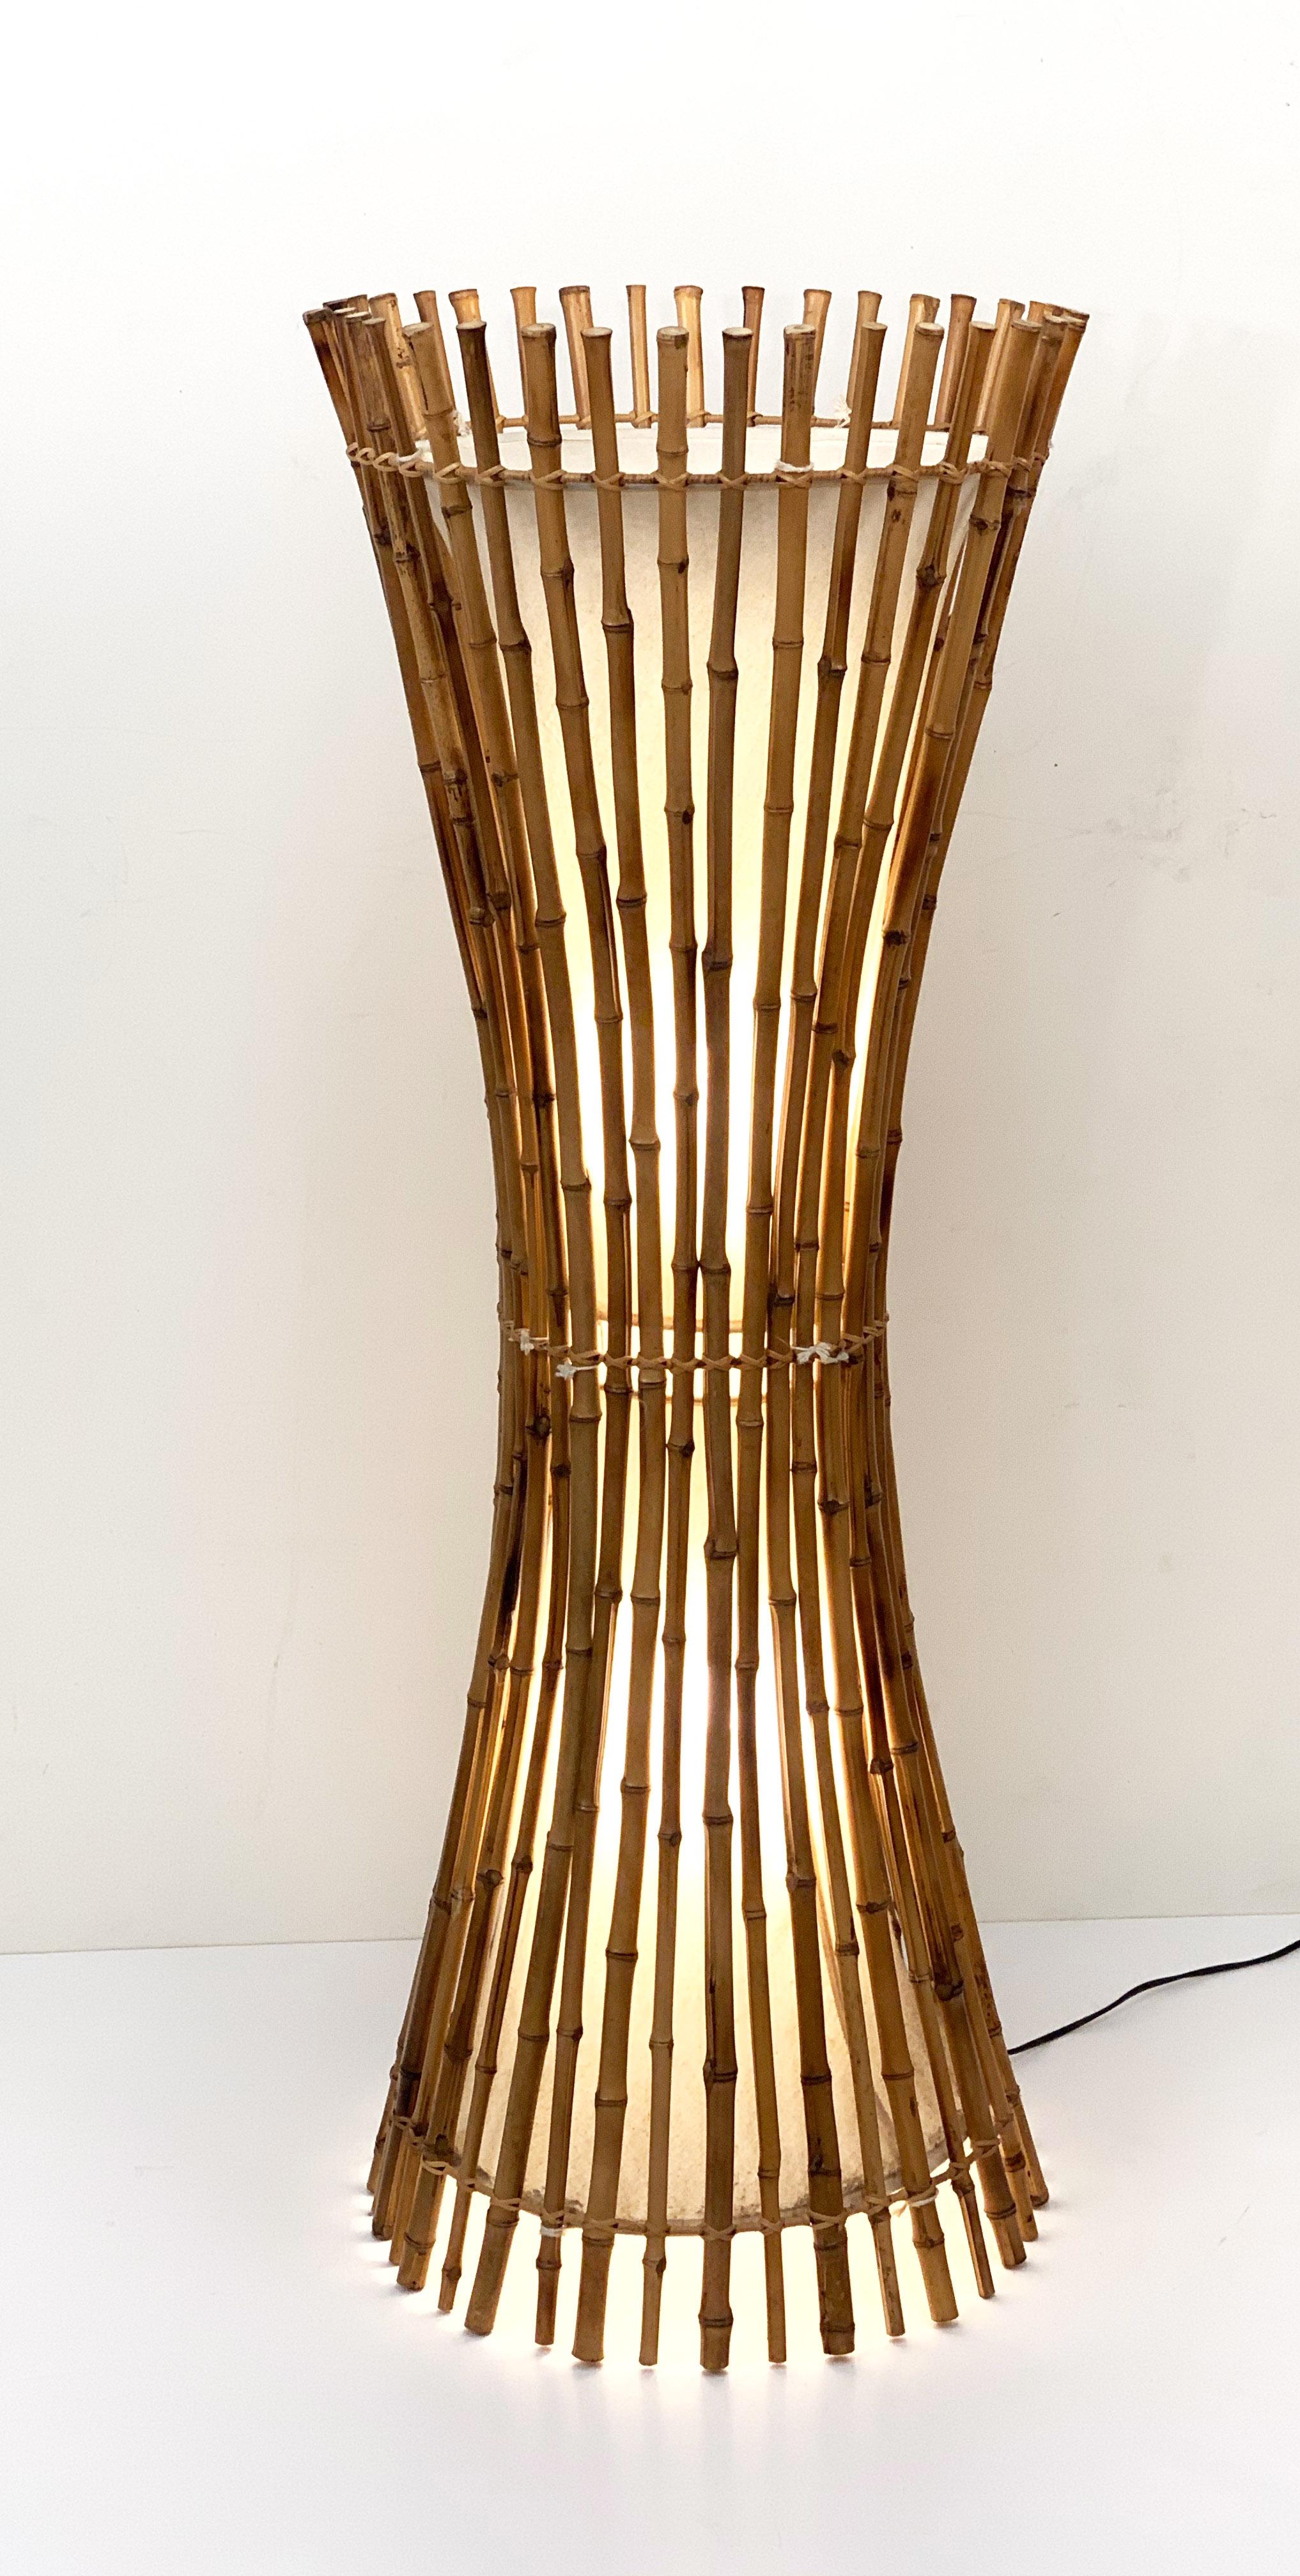 Midcentury Bamboo and Rattan Italian Floor Lamp after Franco Albini, 1960s For Sale 2